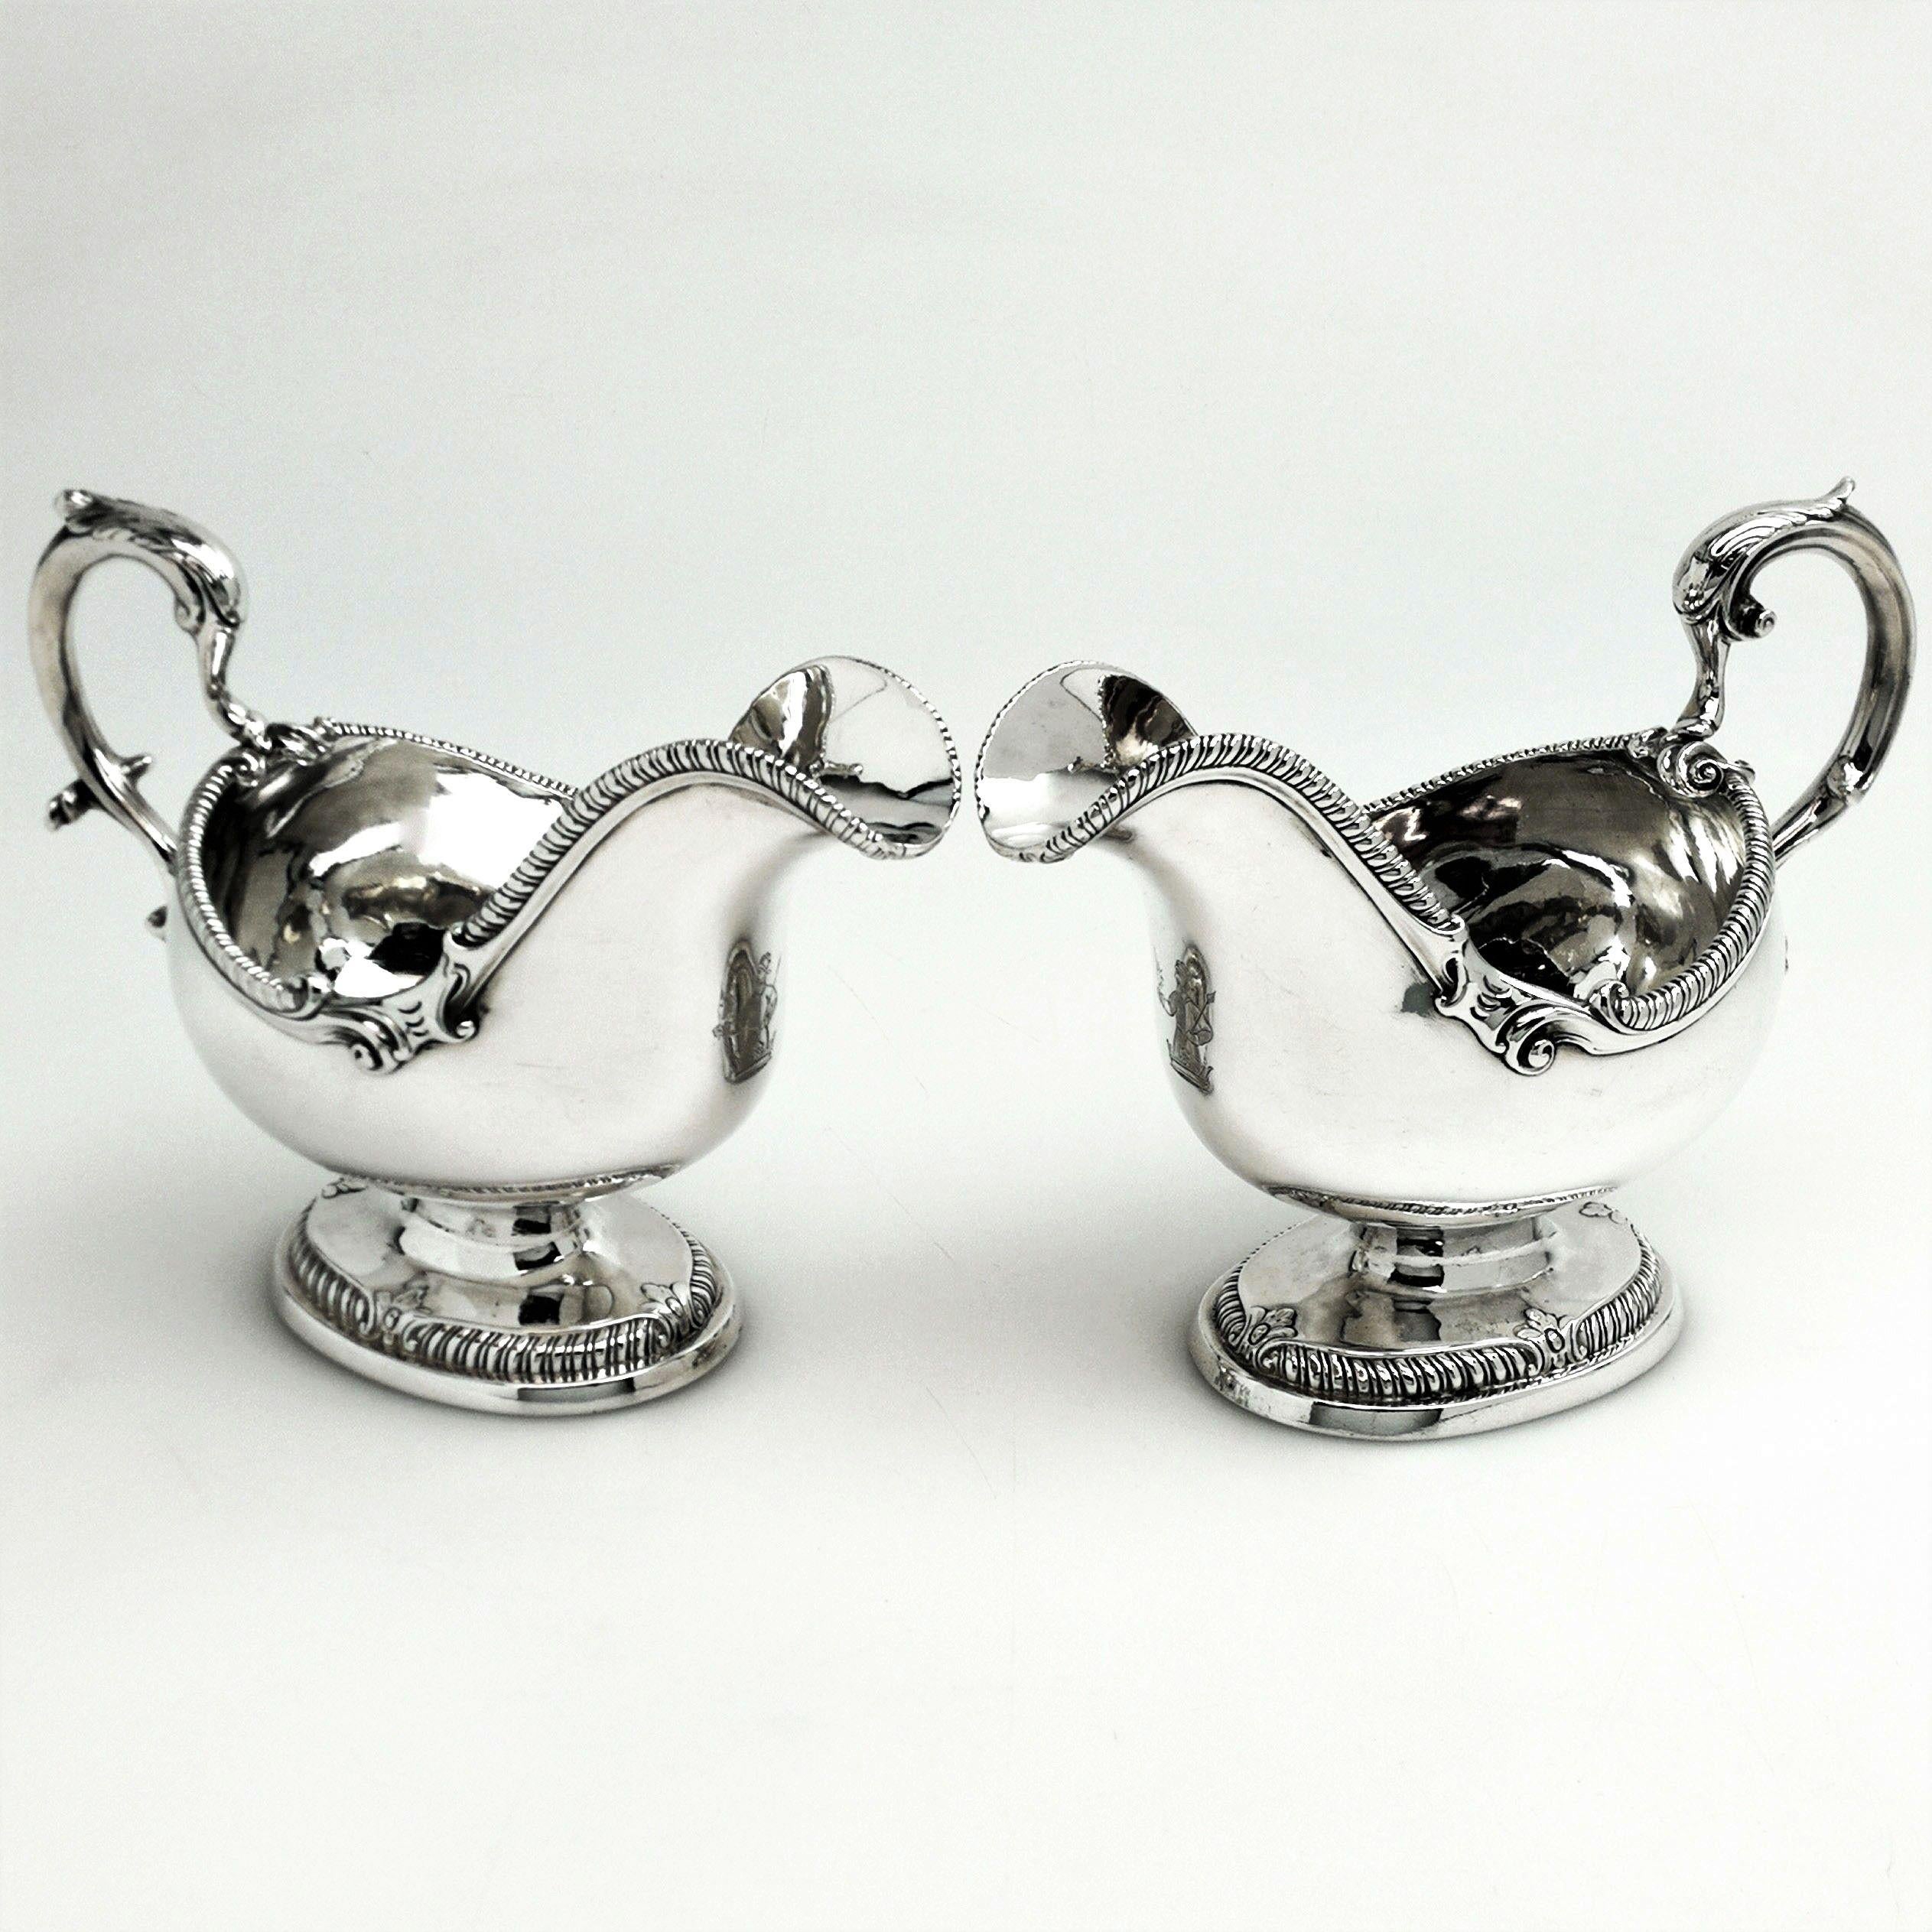 A pair of Antique George III sterling Silver Sauce Boats in a Classic Regency style design. These Sauce Boats have an oval form and each stands on an oval pedestal foot. The rim and foot of each Gravy Boat are embellished with a gadroon pattern